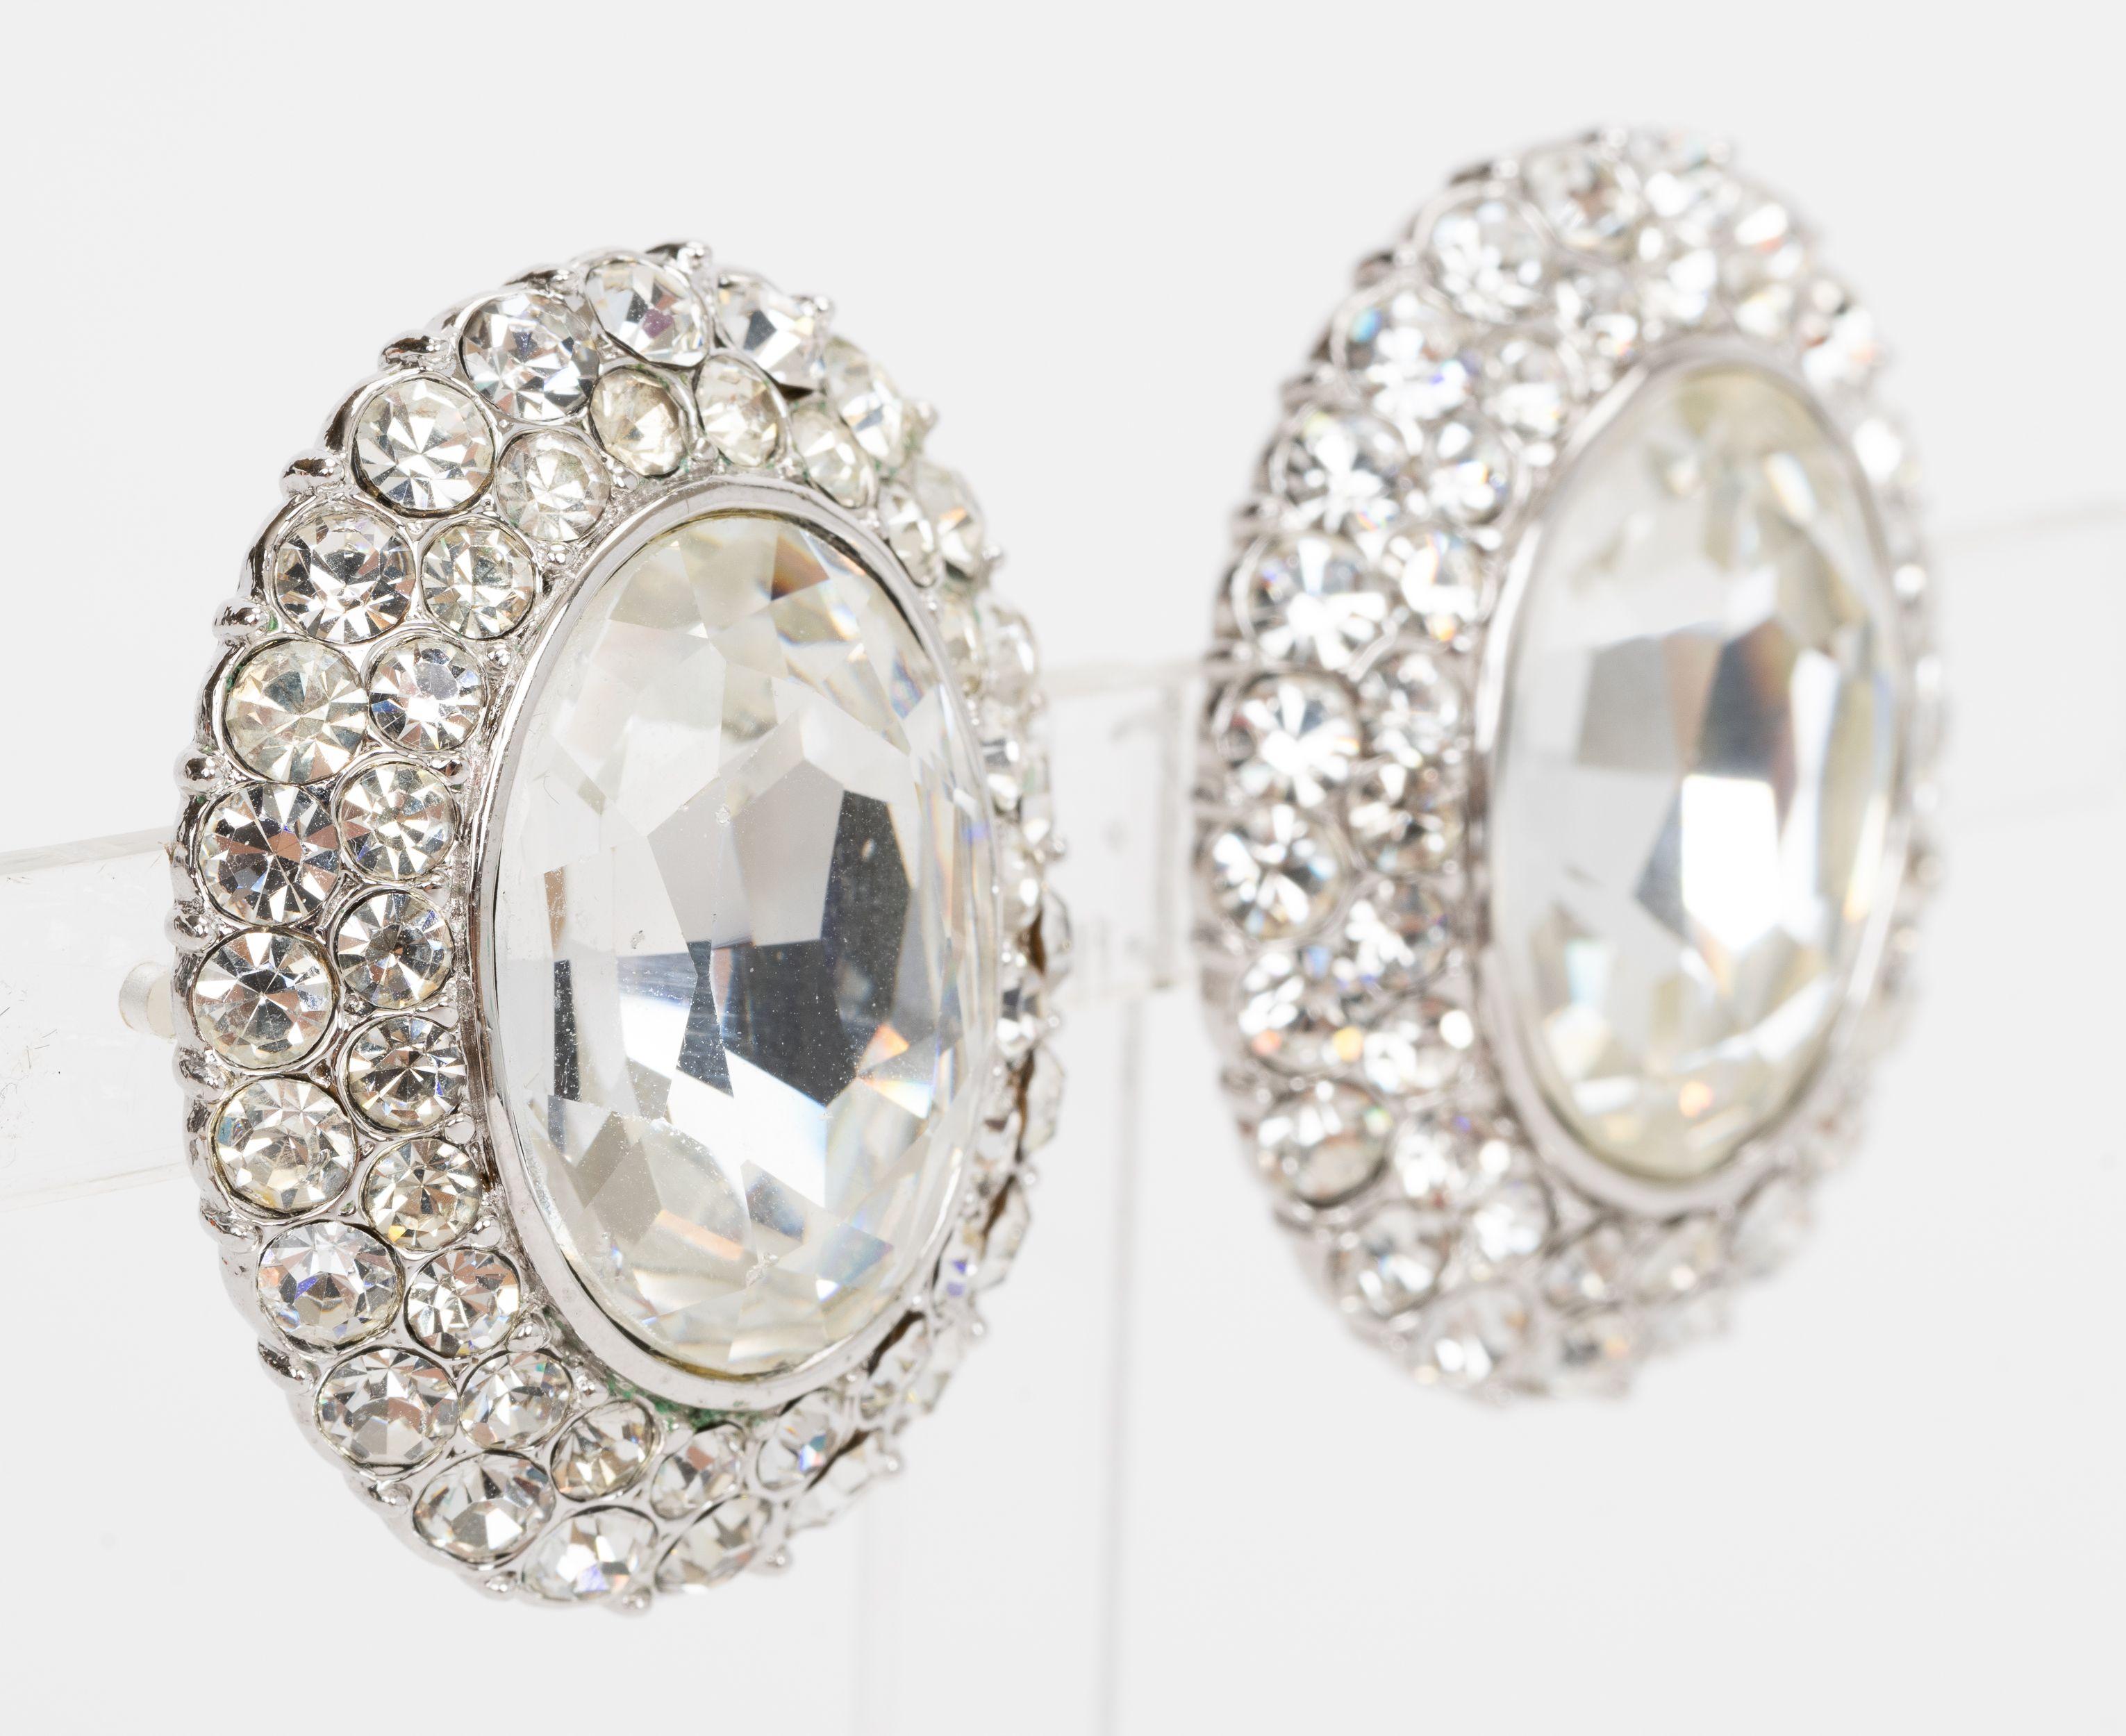 The Yves Saint Laurent Crystal Earrings feature a center crystal rhinestone with surrounding round crystals. The earrings are easy clip on. Come with velvet pouch.